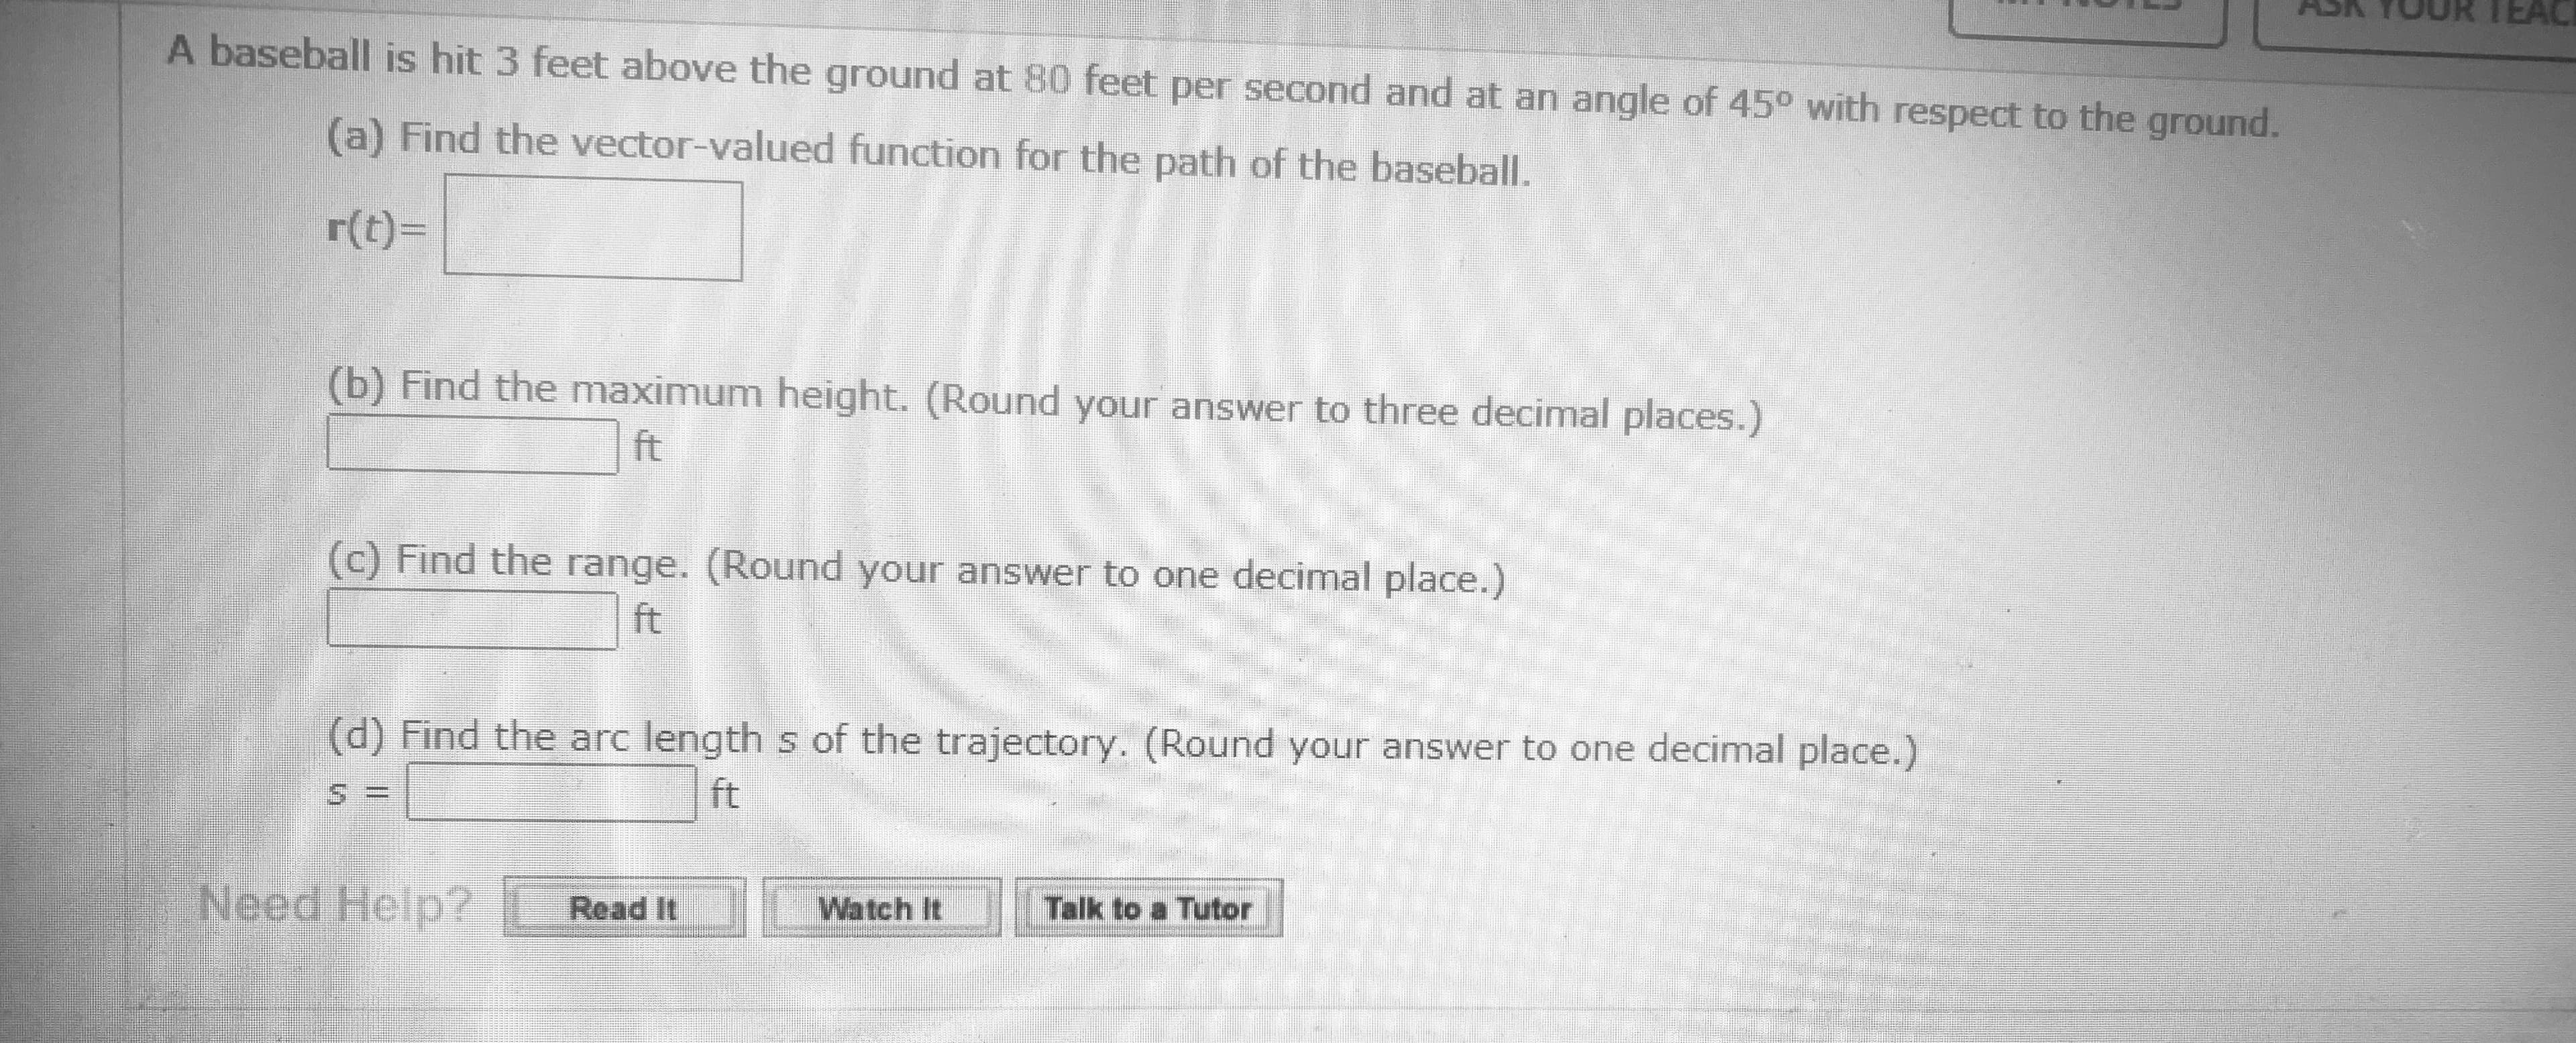 A baseball is hit 3 feet above the ground at 80 feet per second and at an angle of 45° with respect to the ground.
(a) Find the vector-valued function for the path of the baseball.
r(t)=
